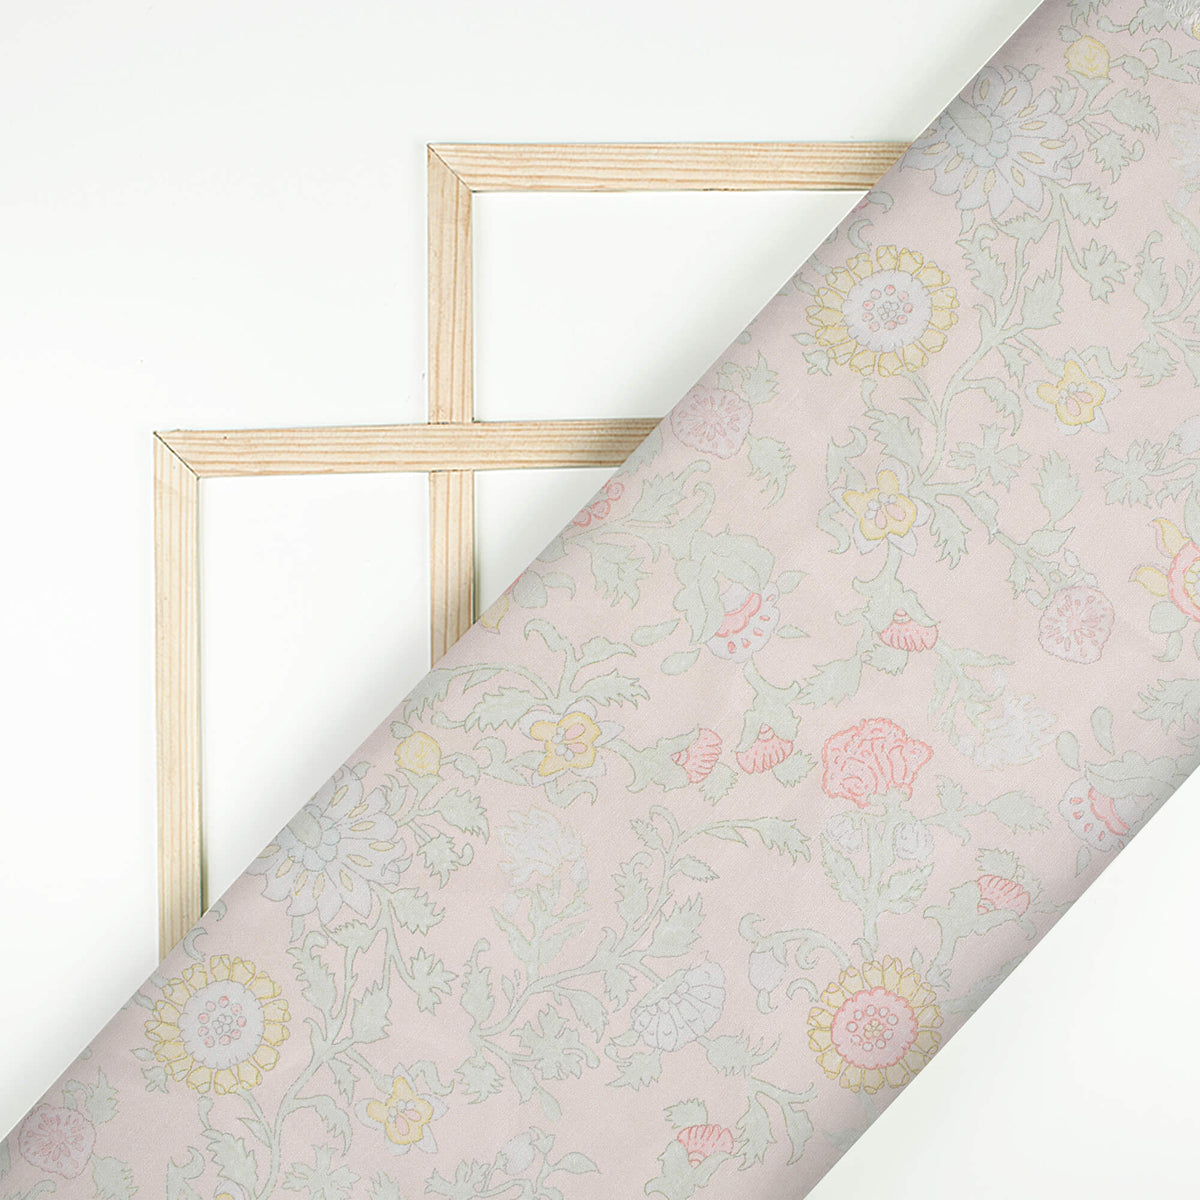 Light Peach And Pale Pink Floral Pattern Digital Print Chanderi Fabric